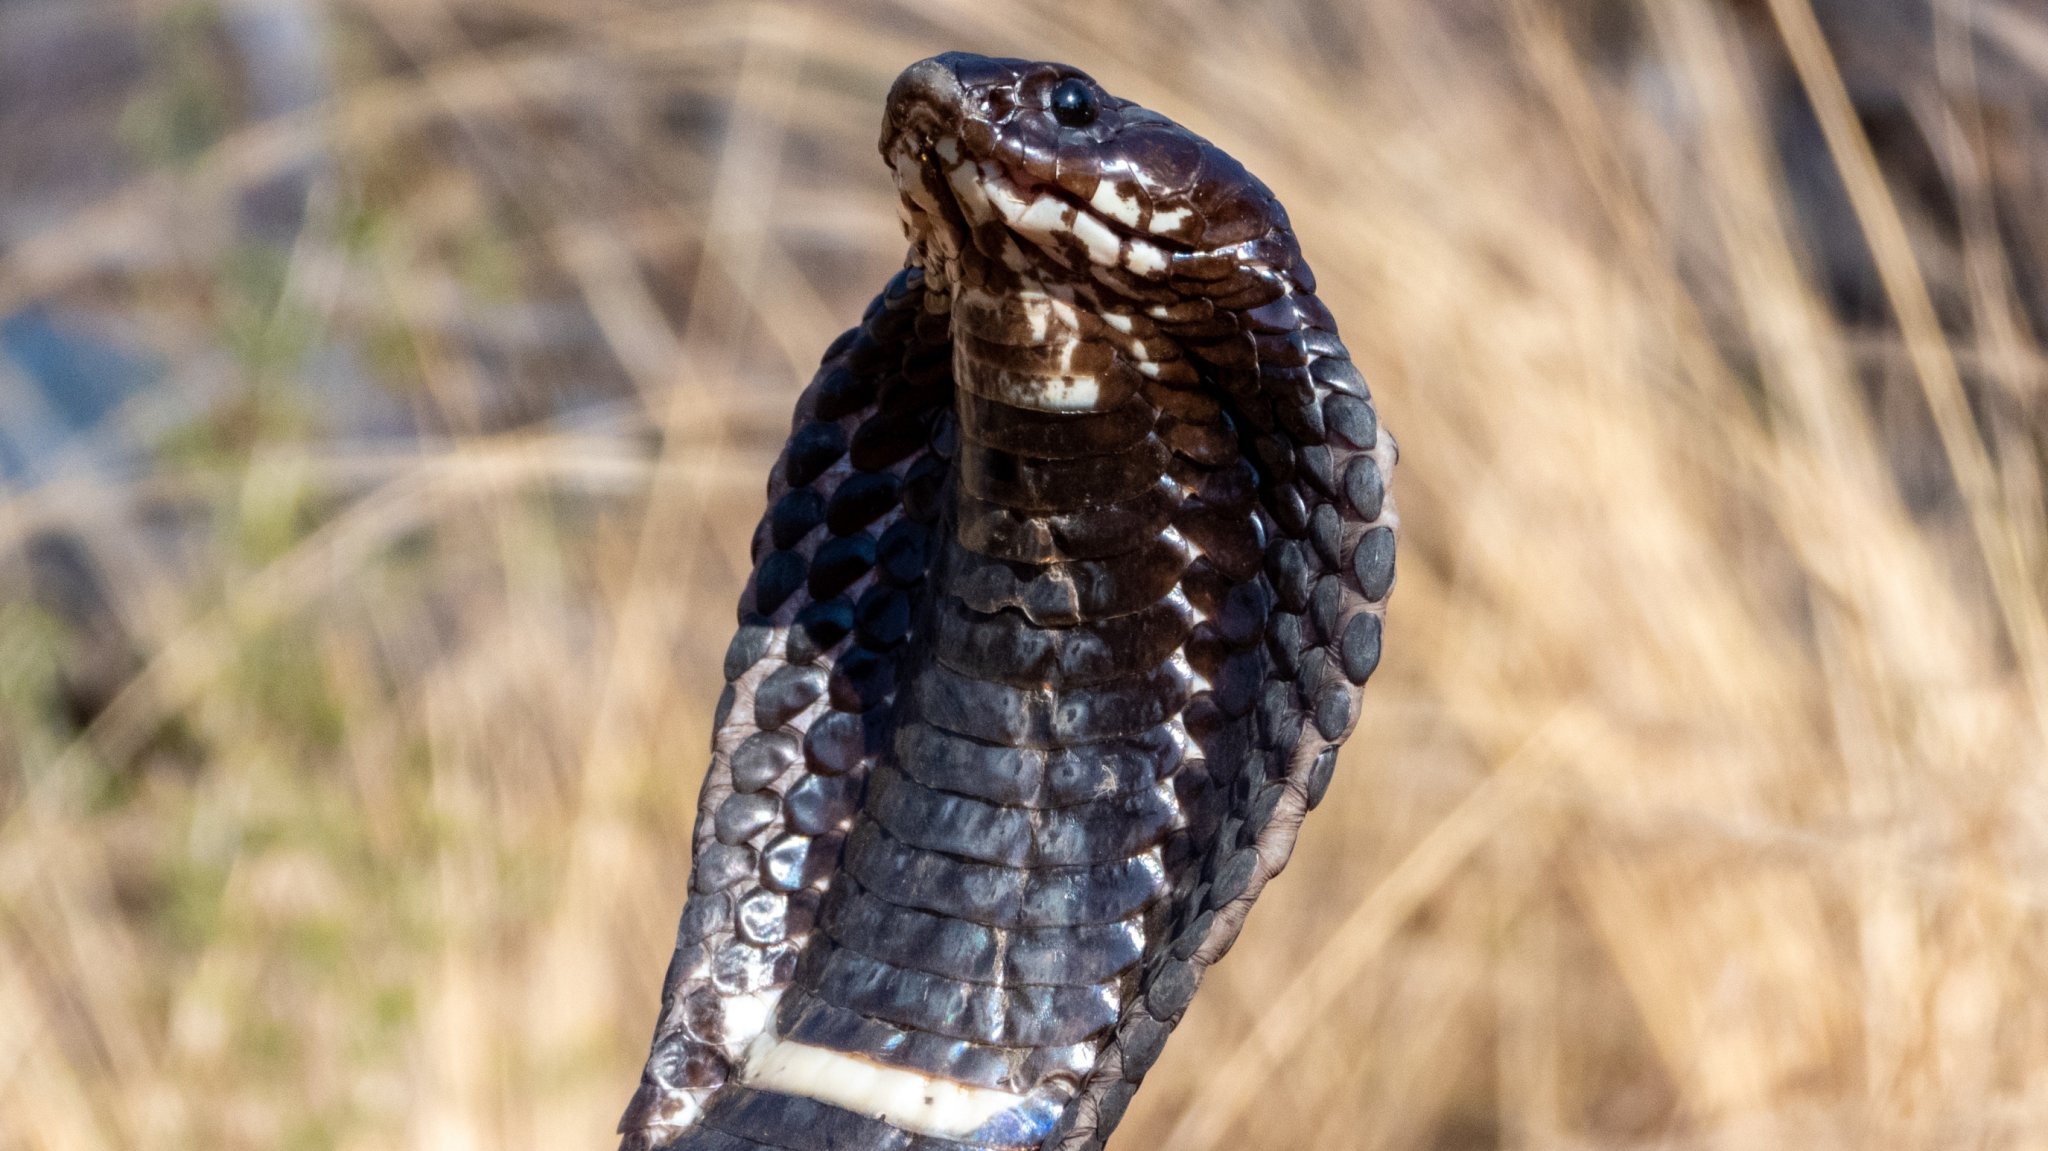 Snake Catcher In South Africa Goes Viral After Daring Capture Of Spitting Cobra